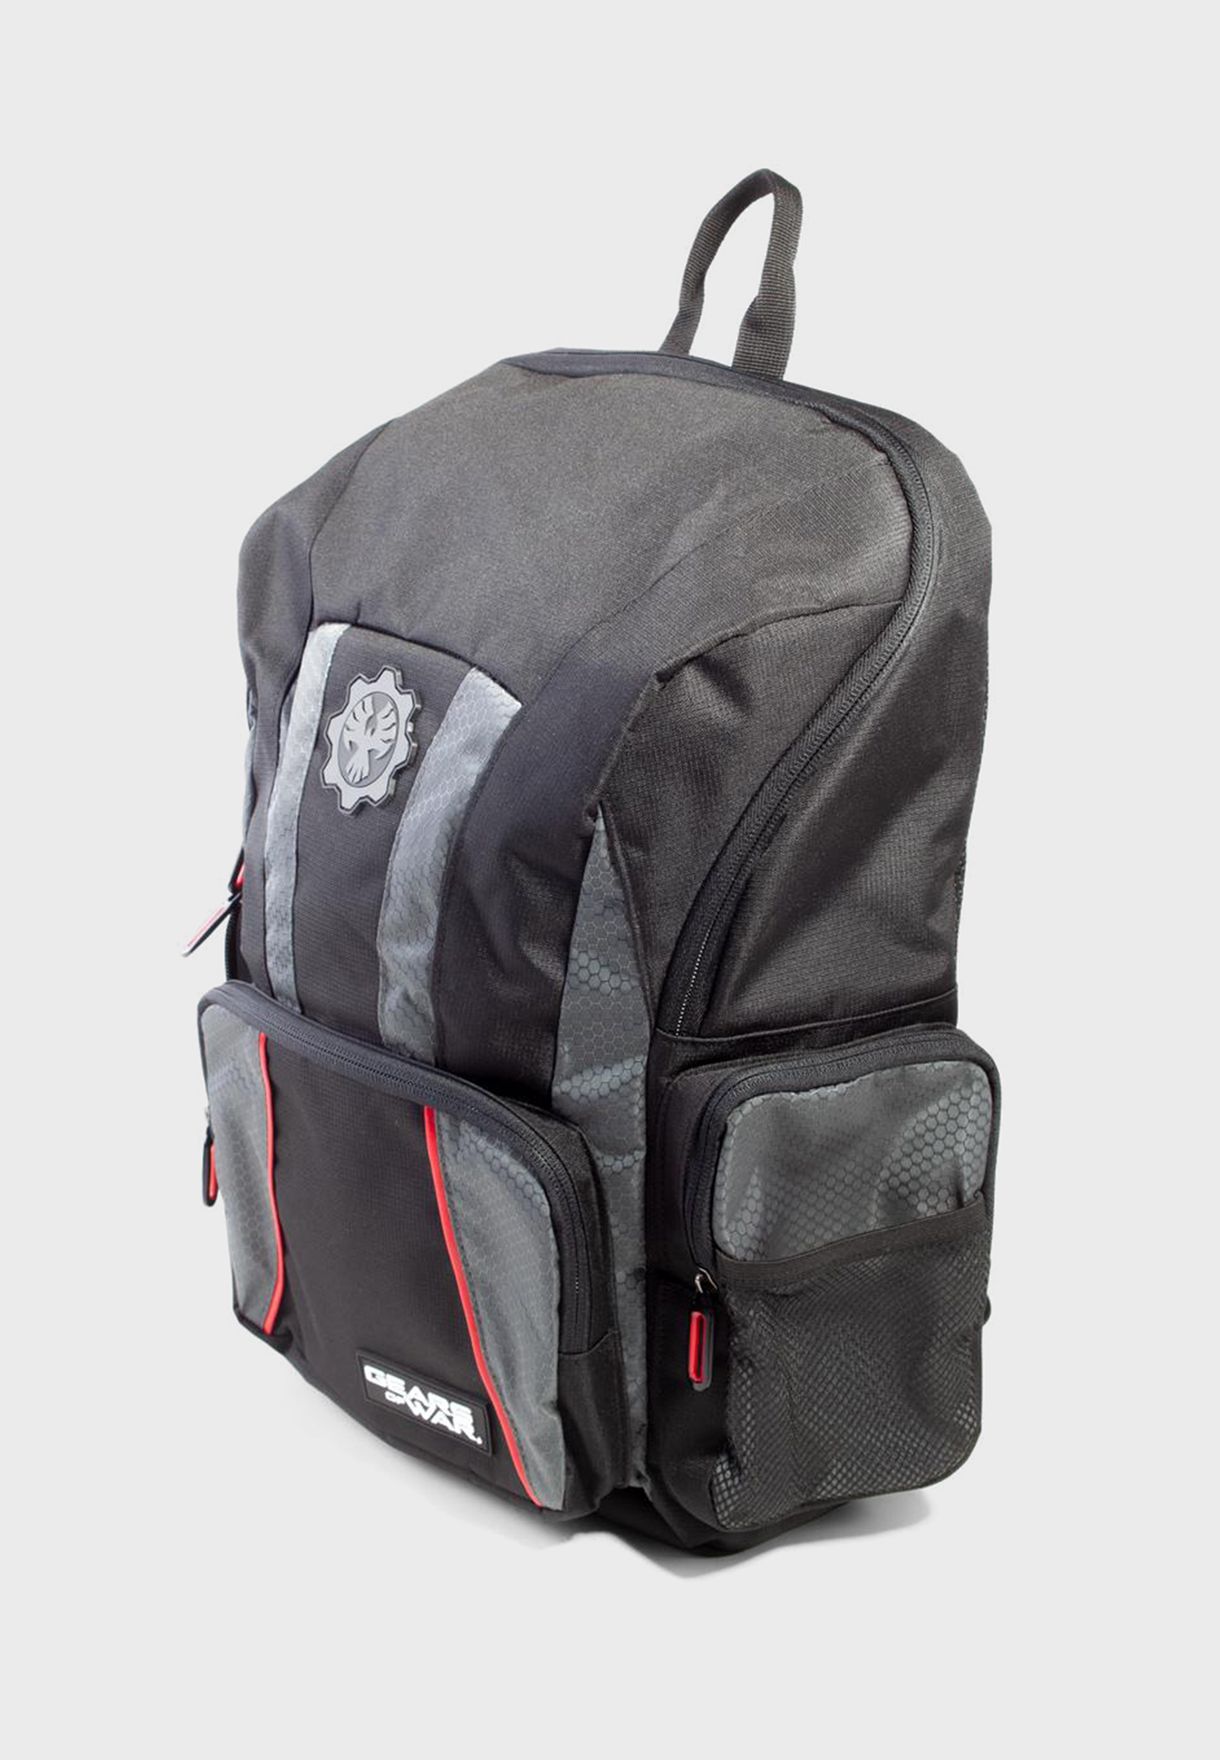 Casual Backpack